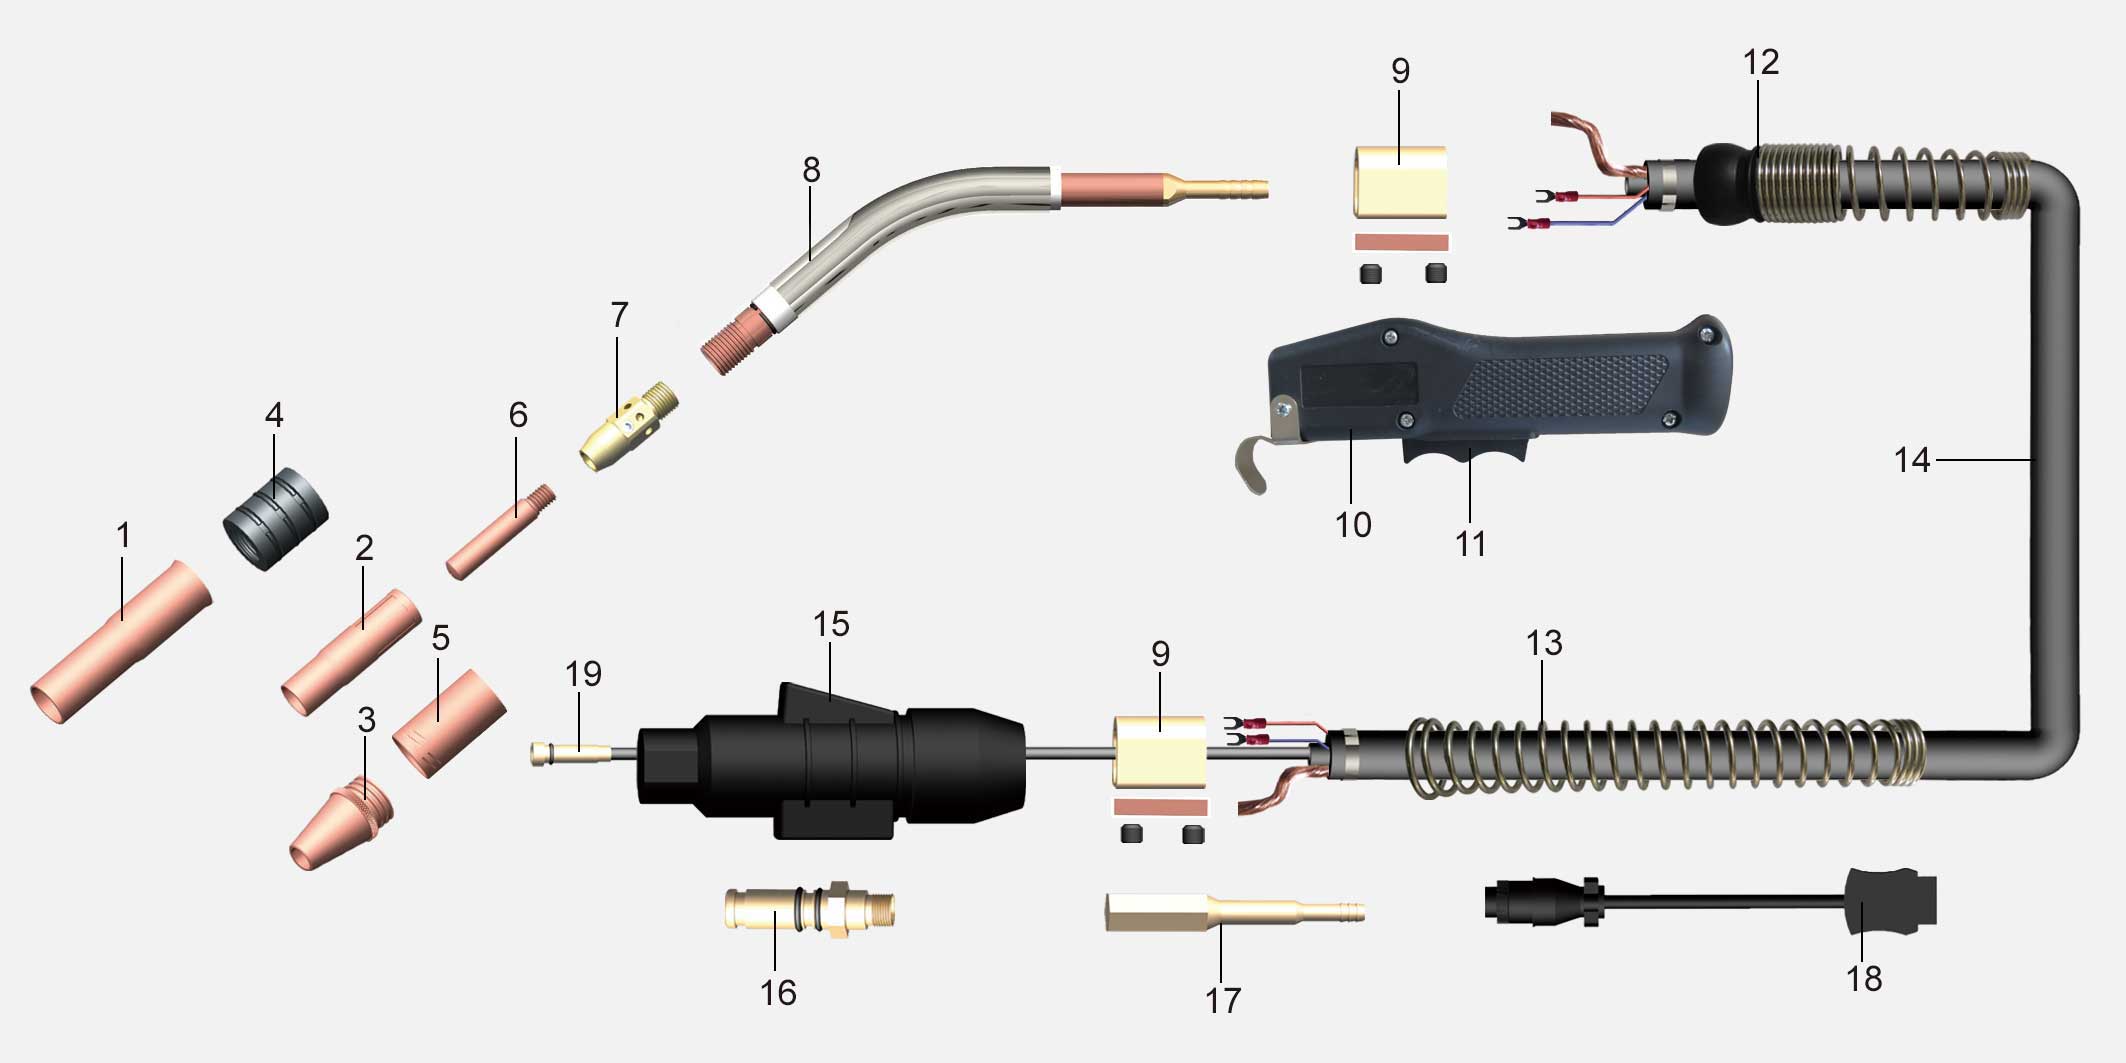 Product structure of the #4 Air cooled MIG/MAG welding torch